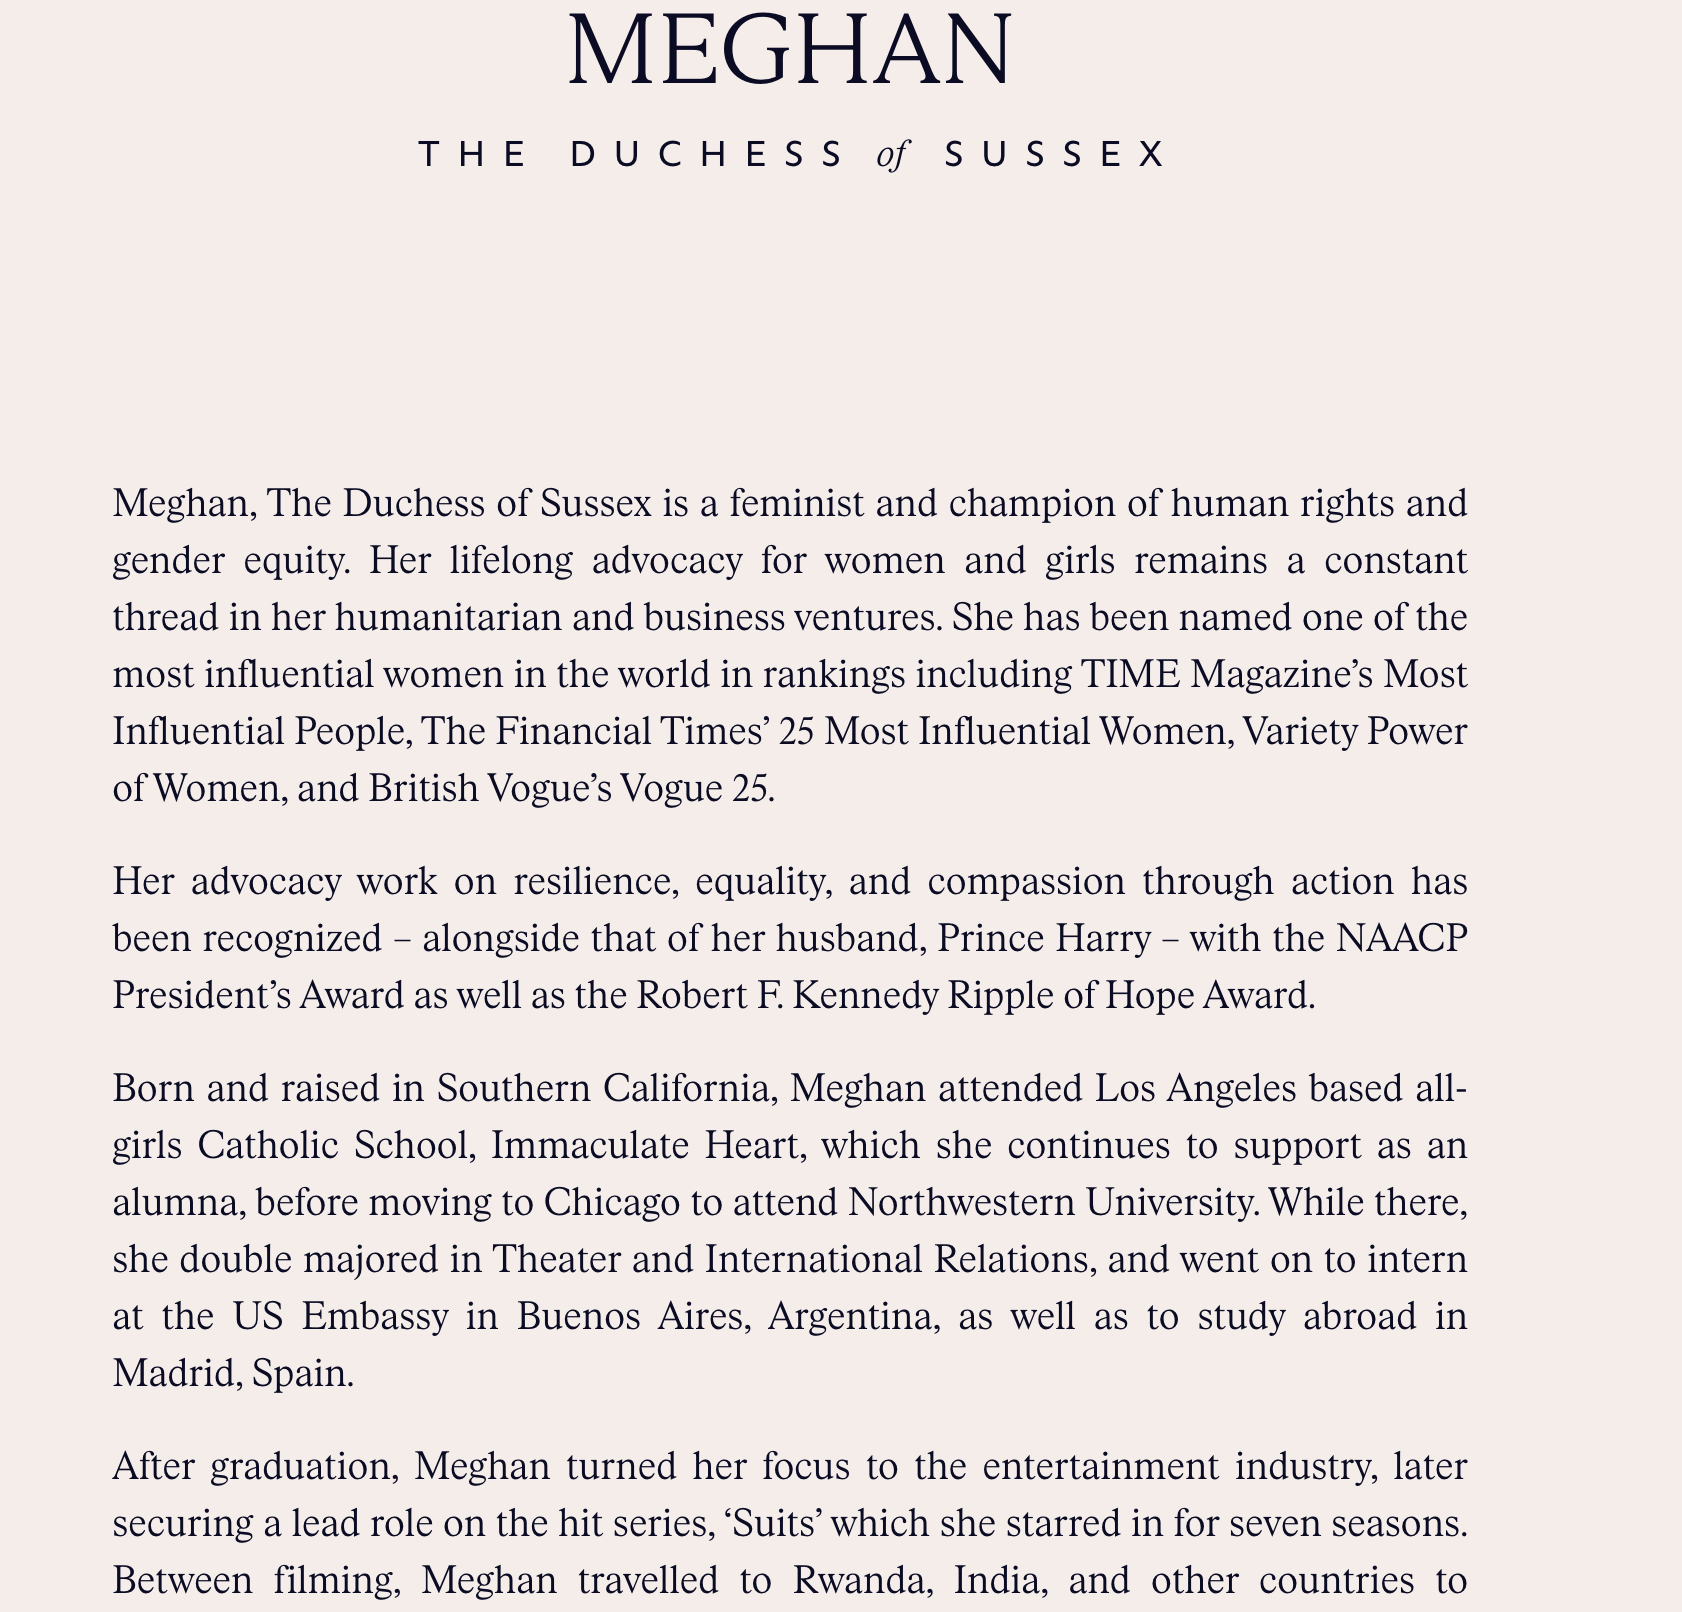 Meghan’s profile details the book she published to raise money for the victims of the Grenfell Tower fire